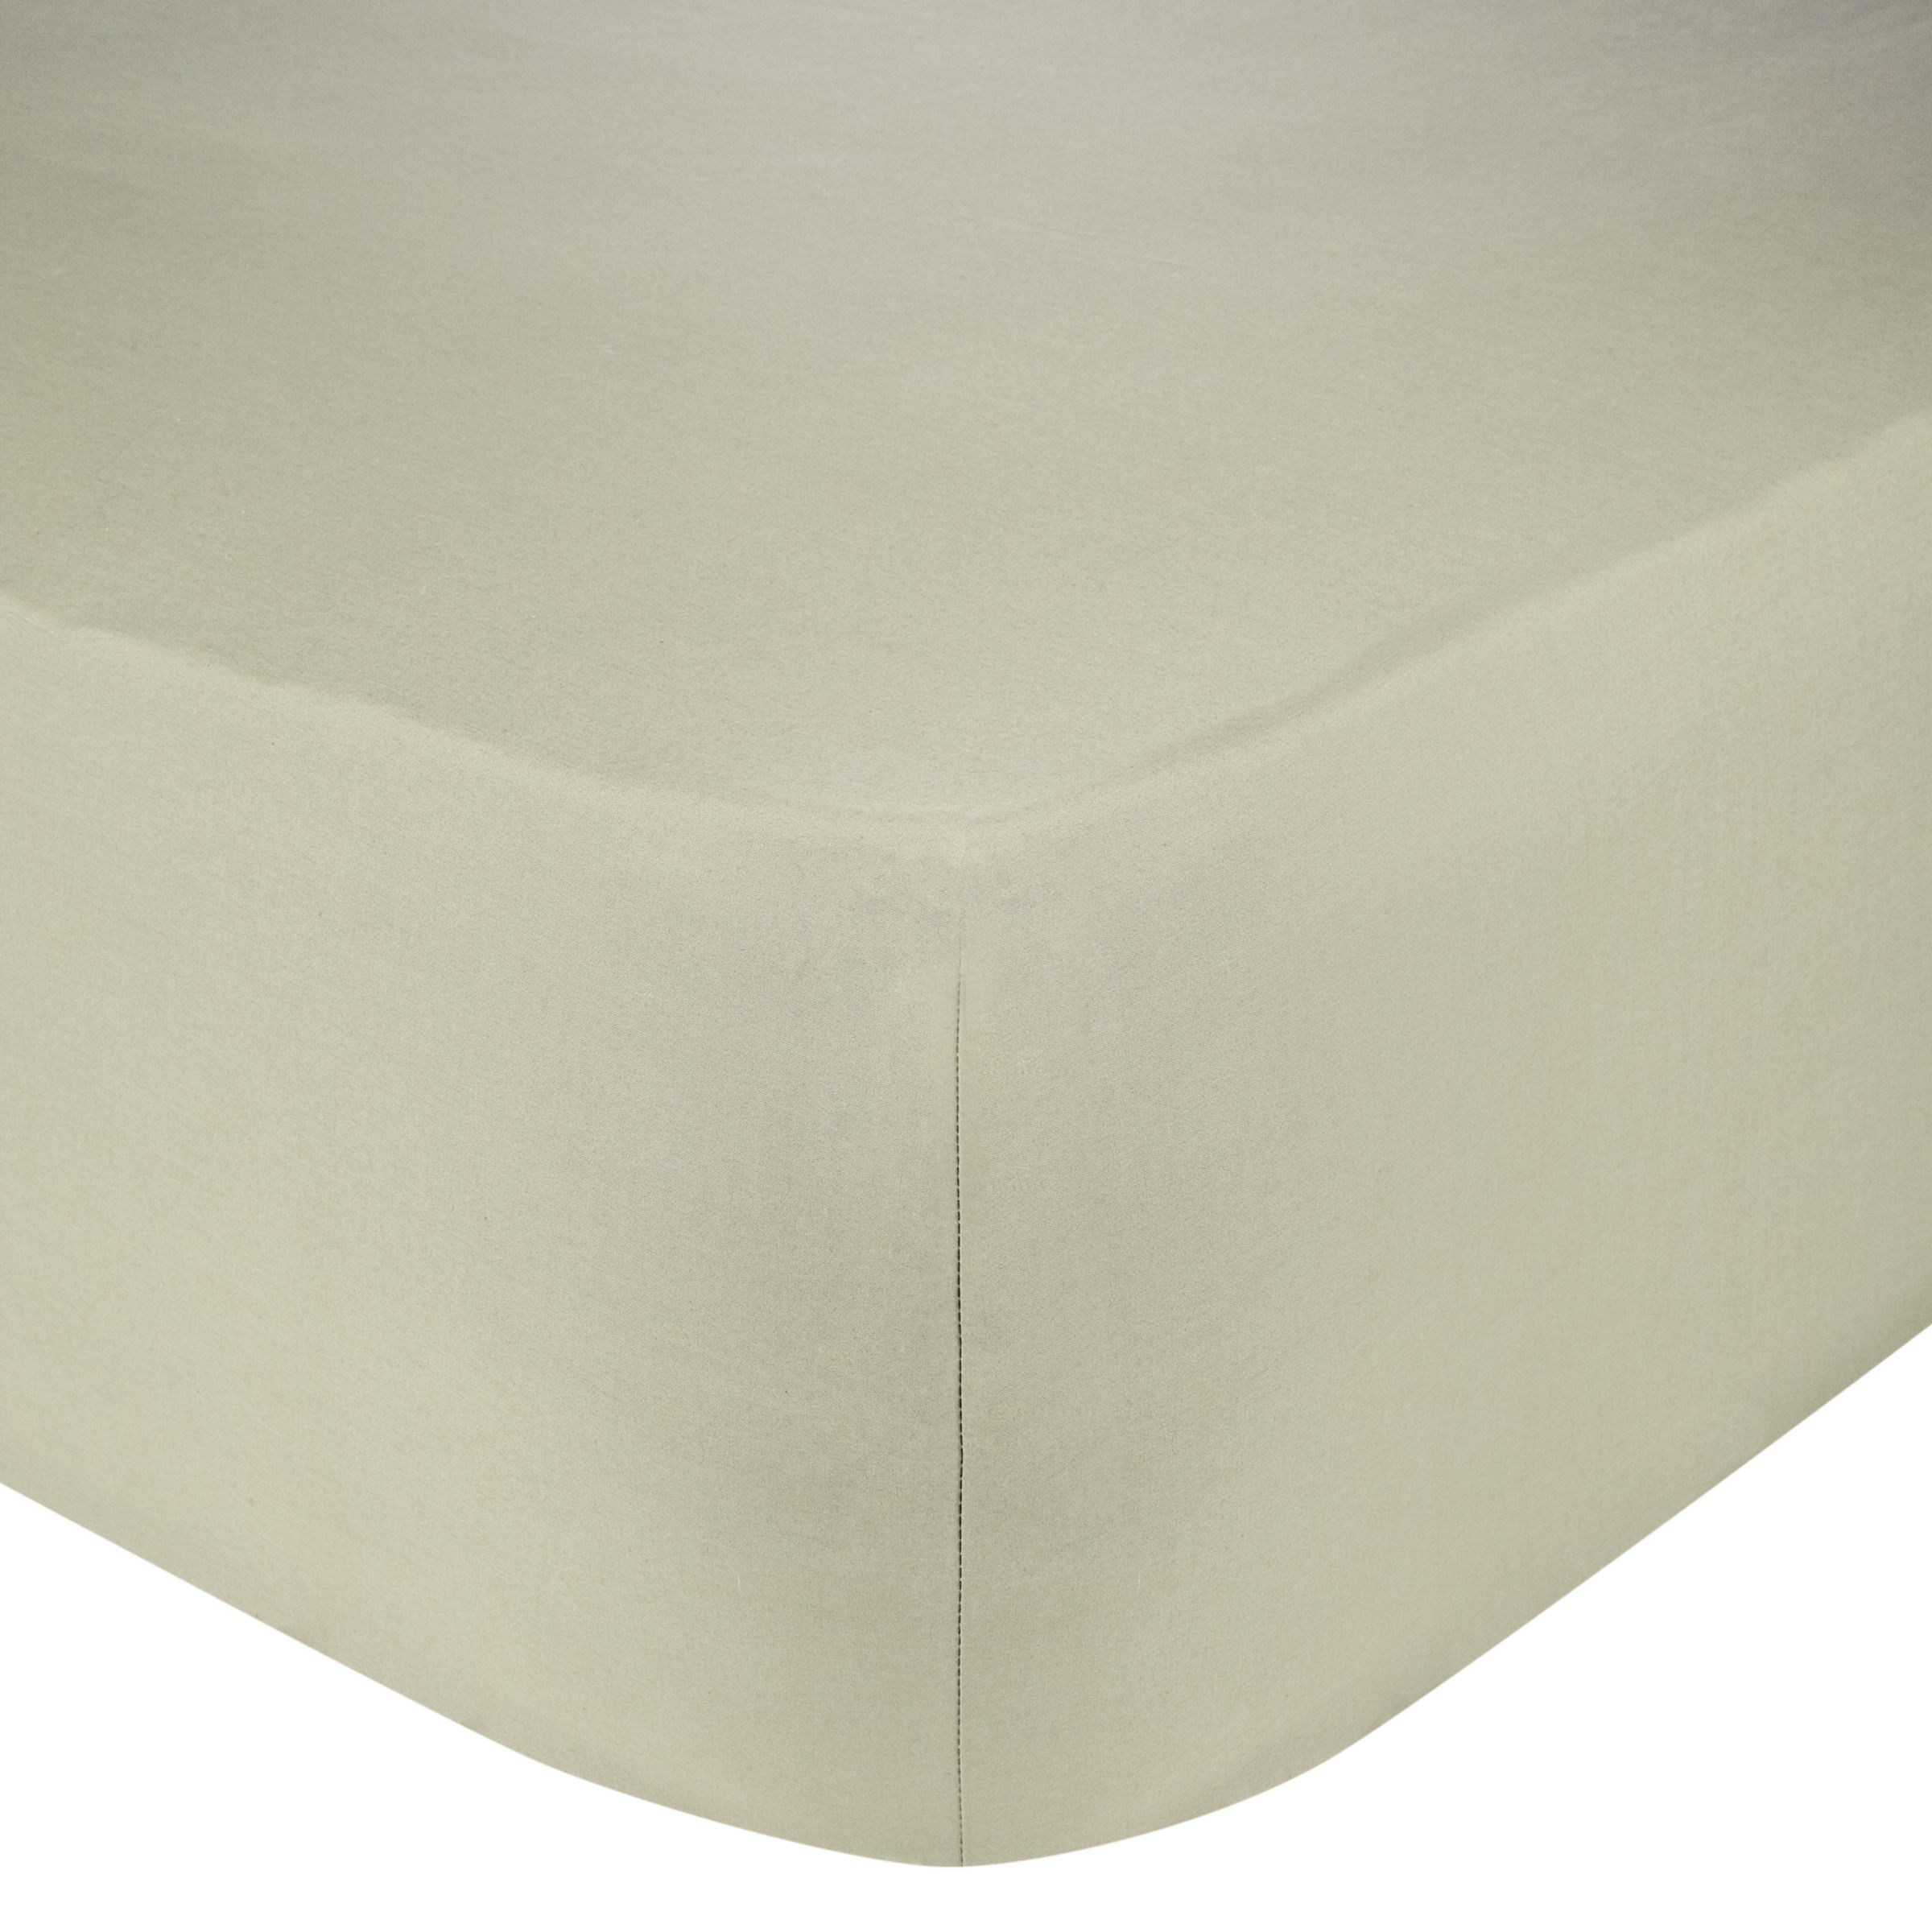 John Lewis & Partners Perfectly Smooth 200 Thread Count Egyptian Cotton Standard Fitted Sheet